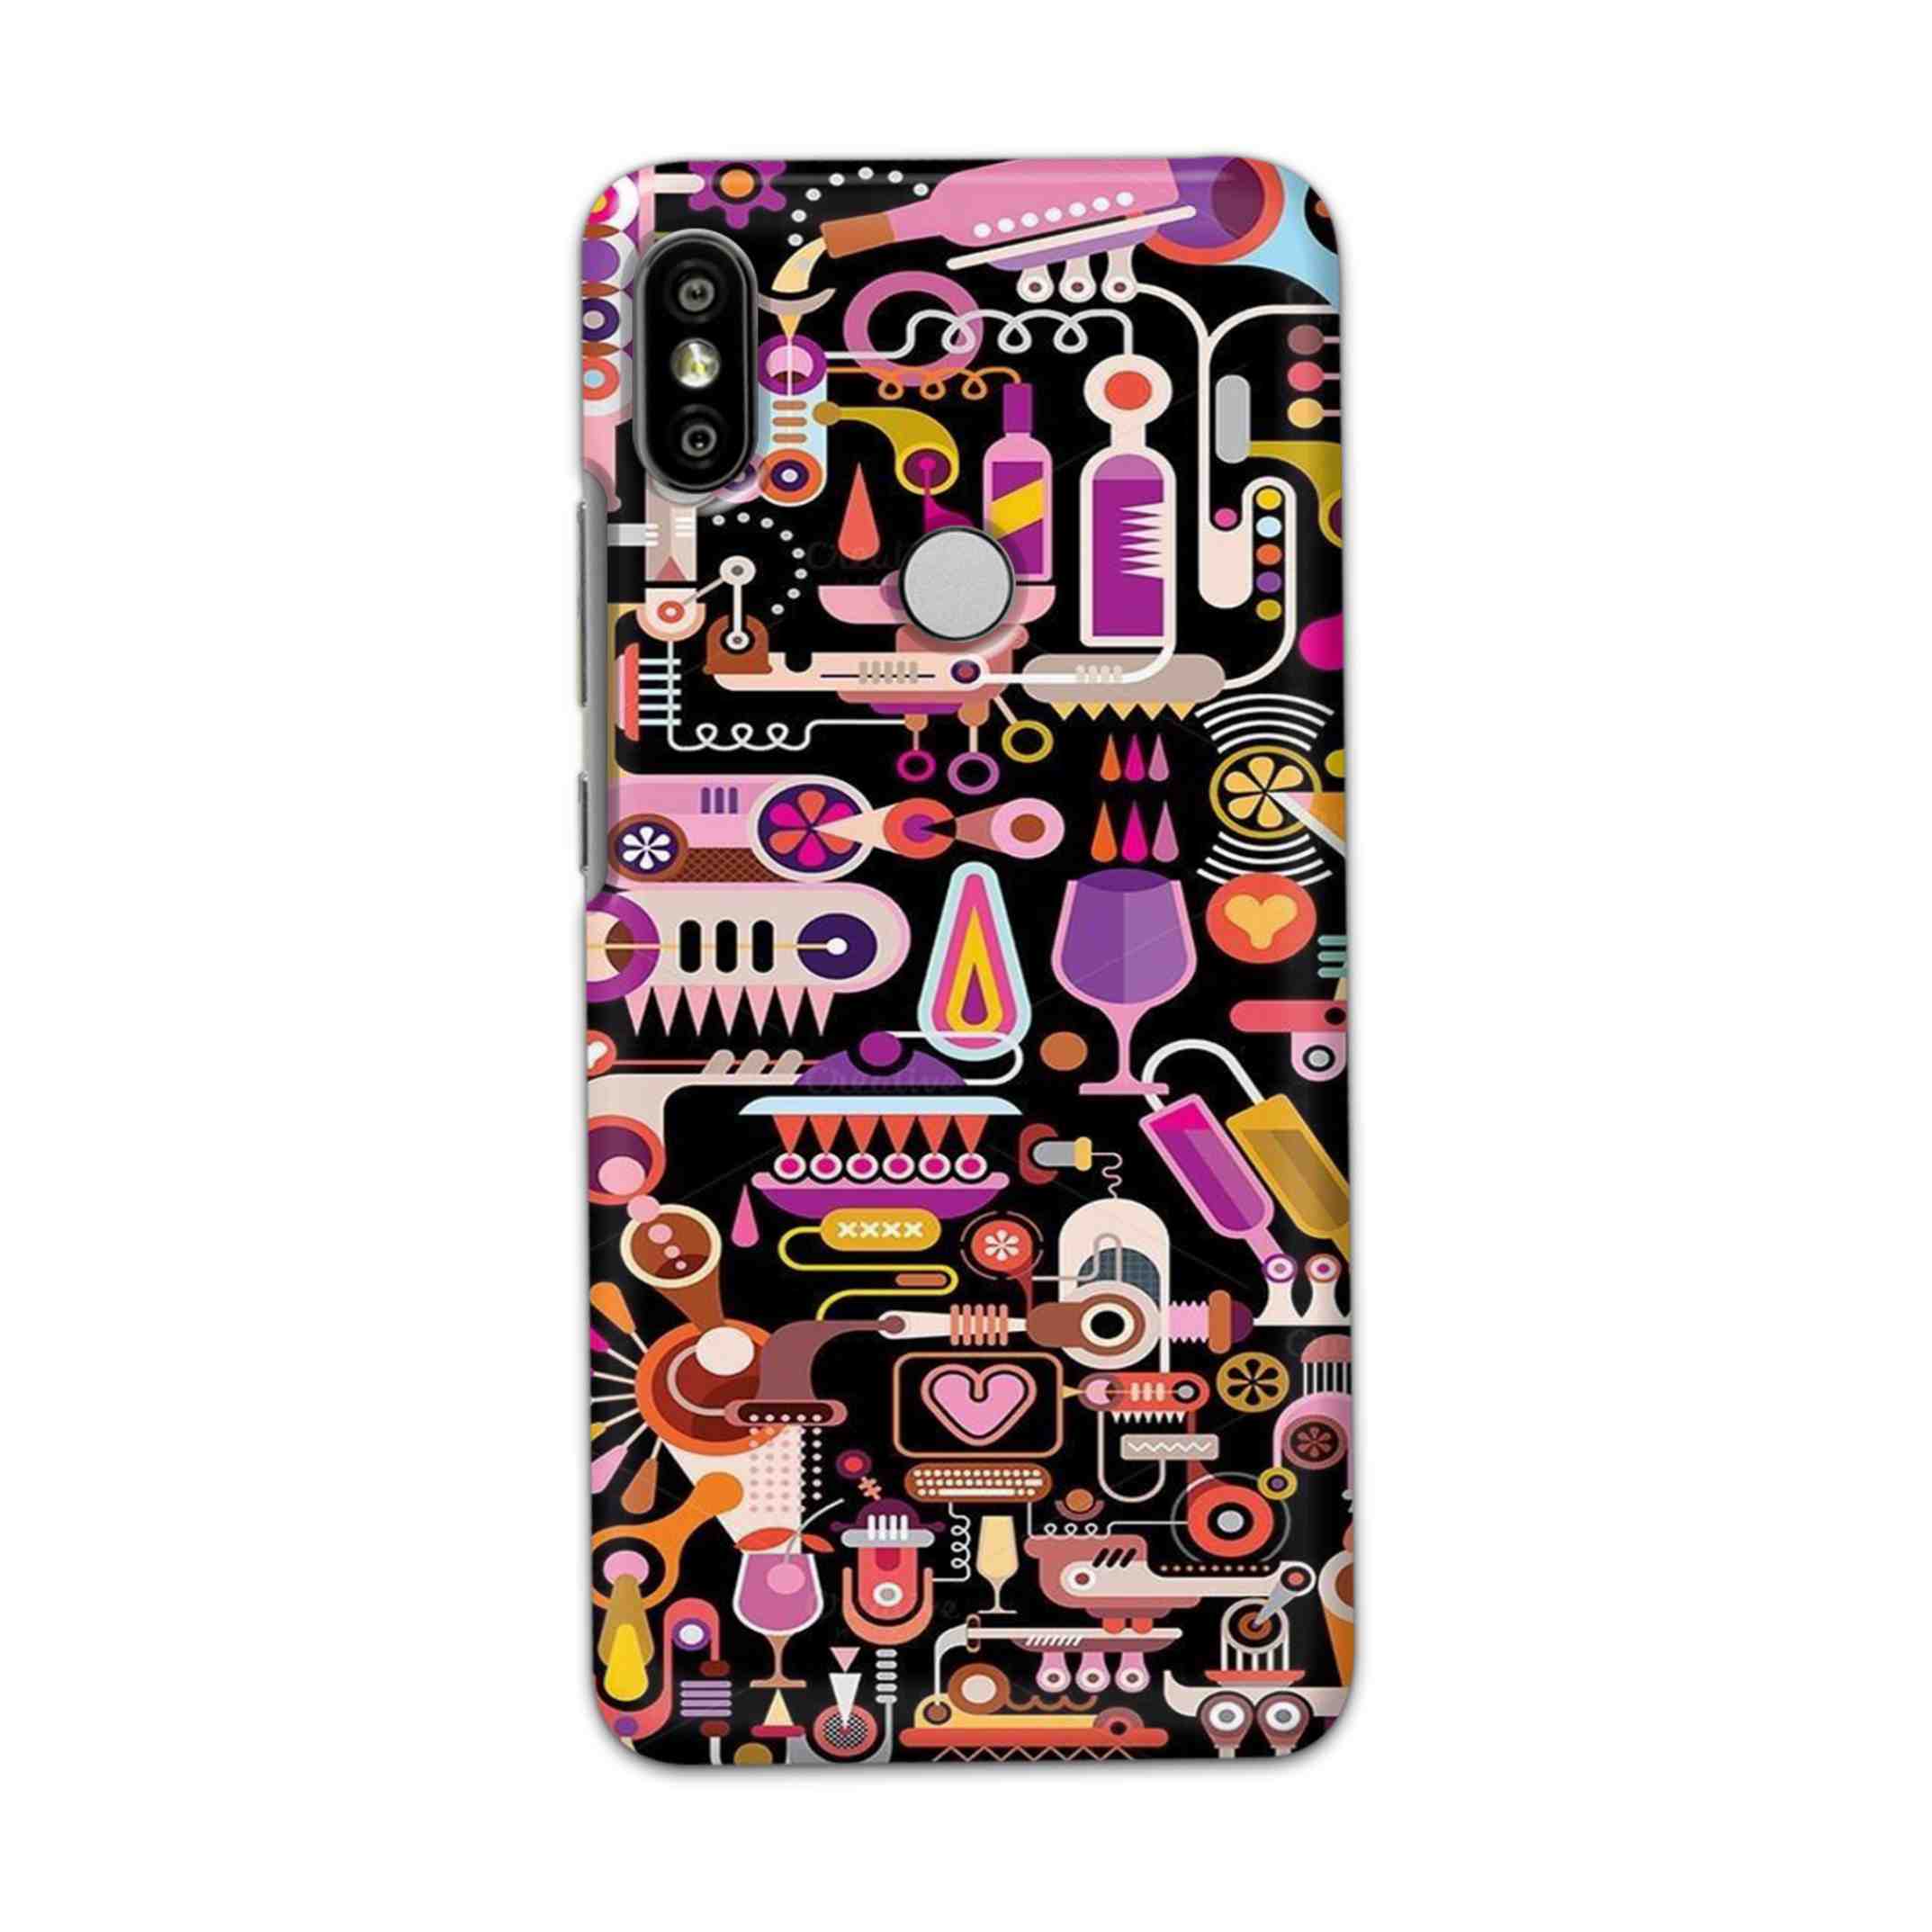 Buy Lab Art Hard Back Mobile Phone Case Cover For Redmi S2 / Y2 Online